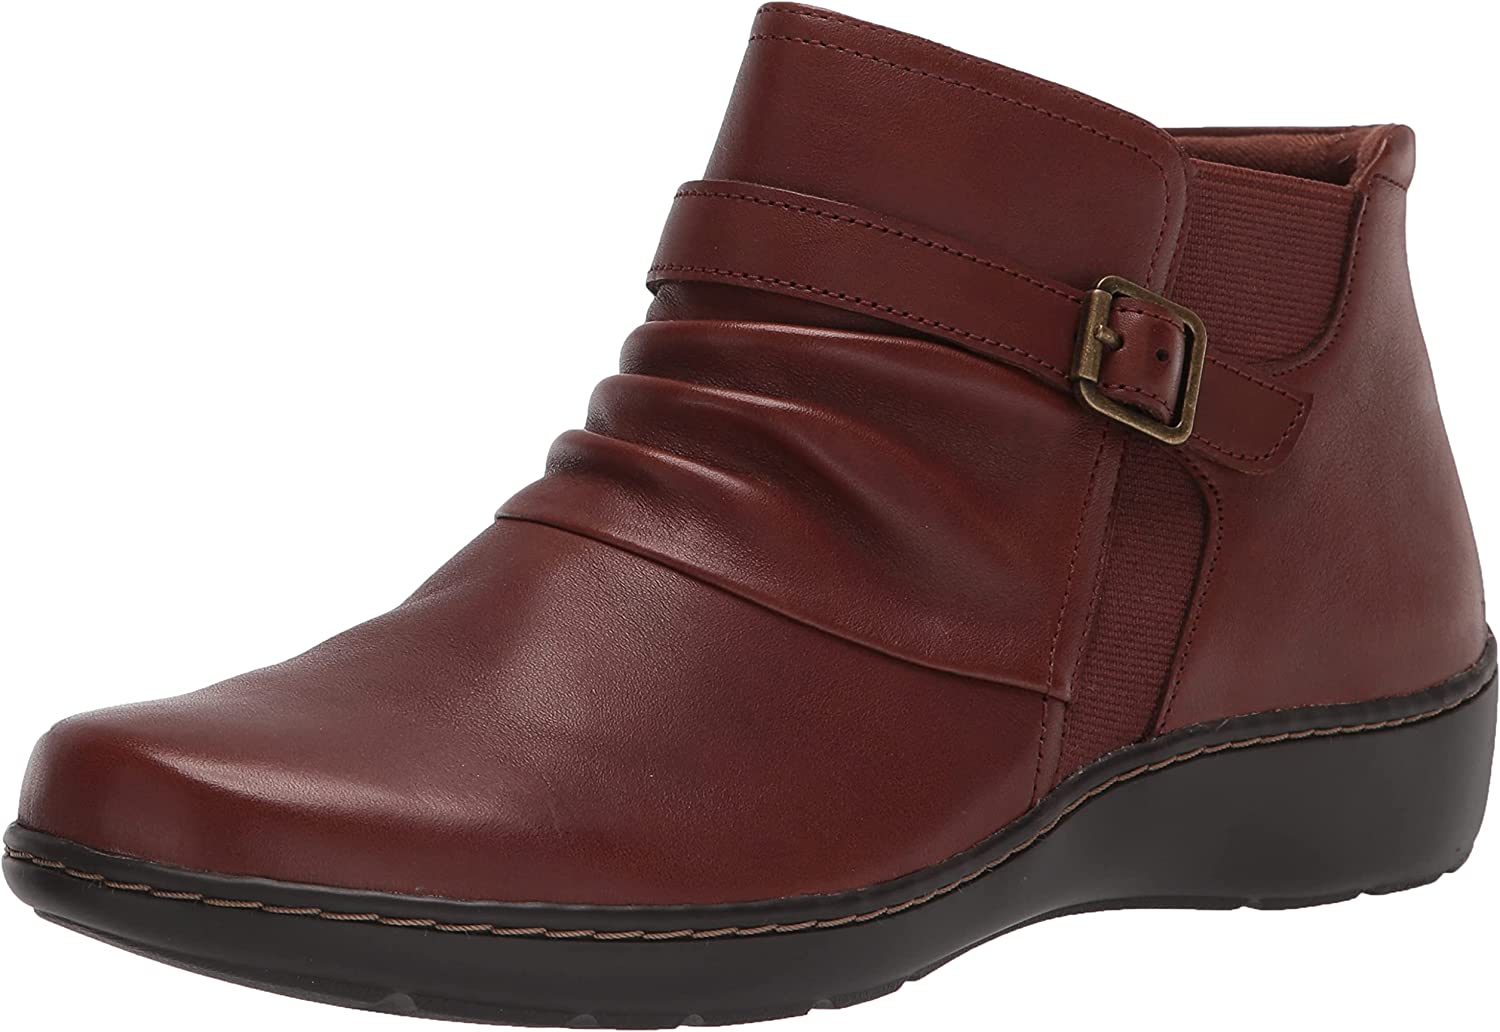 Clarks Women's Cora Rouched Ankle Boot, 12 US - Dark Tan Leather